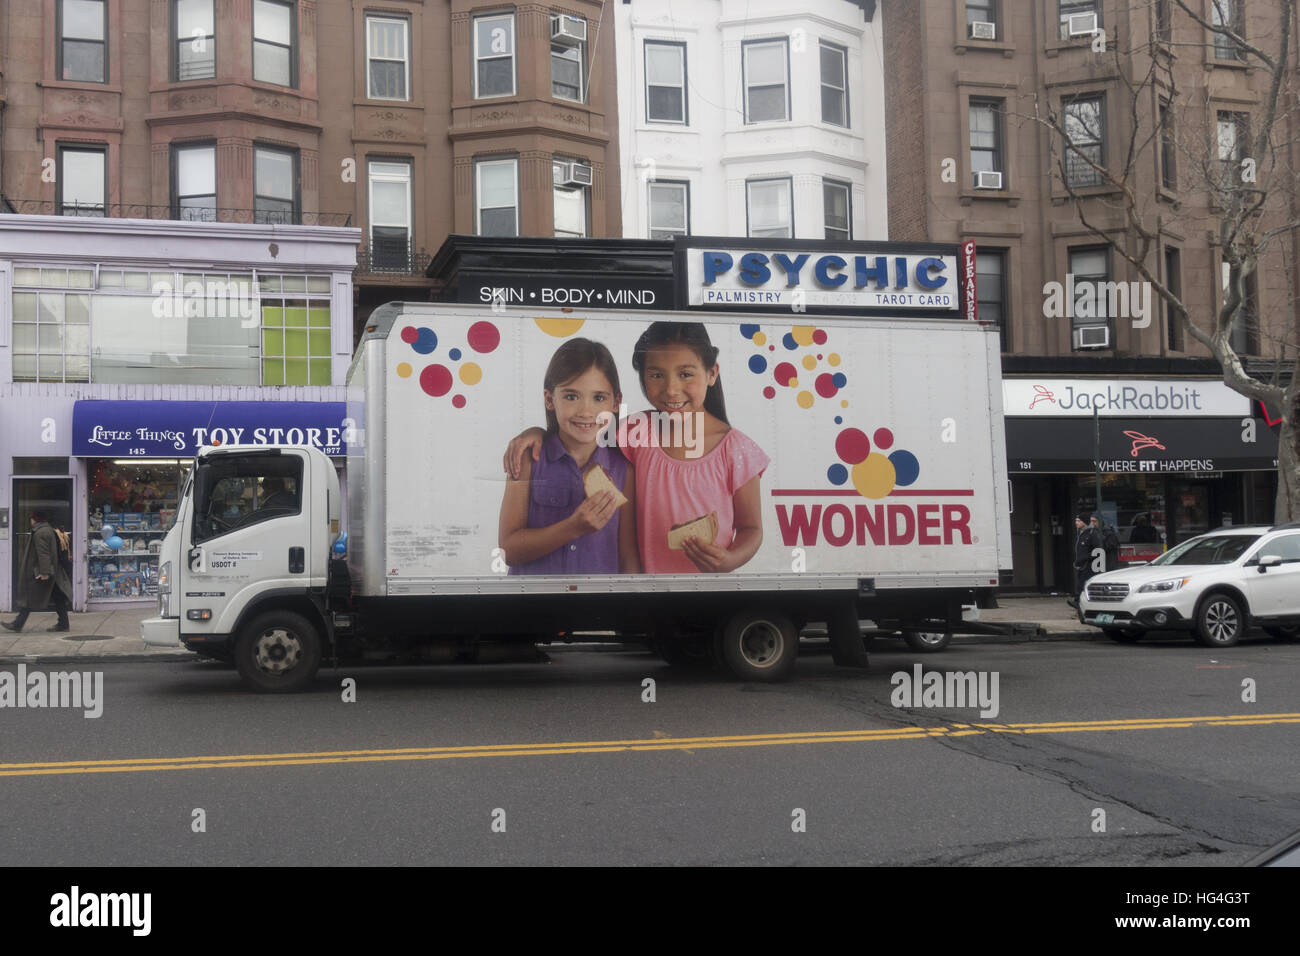 Wonder Bread truck with its iconic colorful balloons has been around since 1921 and is responsible for many baking firsts including adding vitamins to the loaf. Due to growing public demand even Wonder Bread will be free of artificial preservatives in the future. Stock Photo